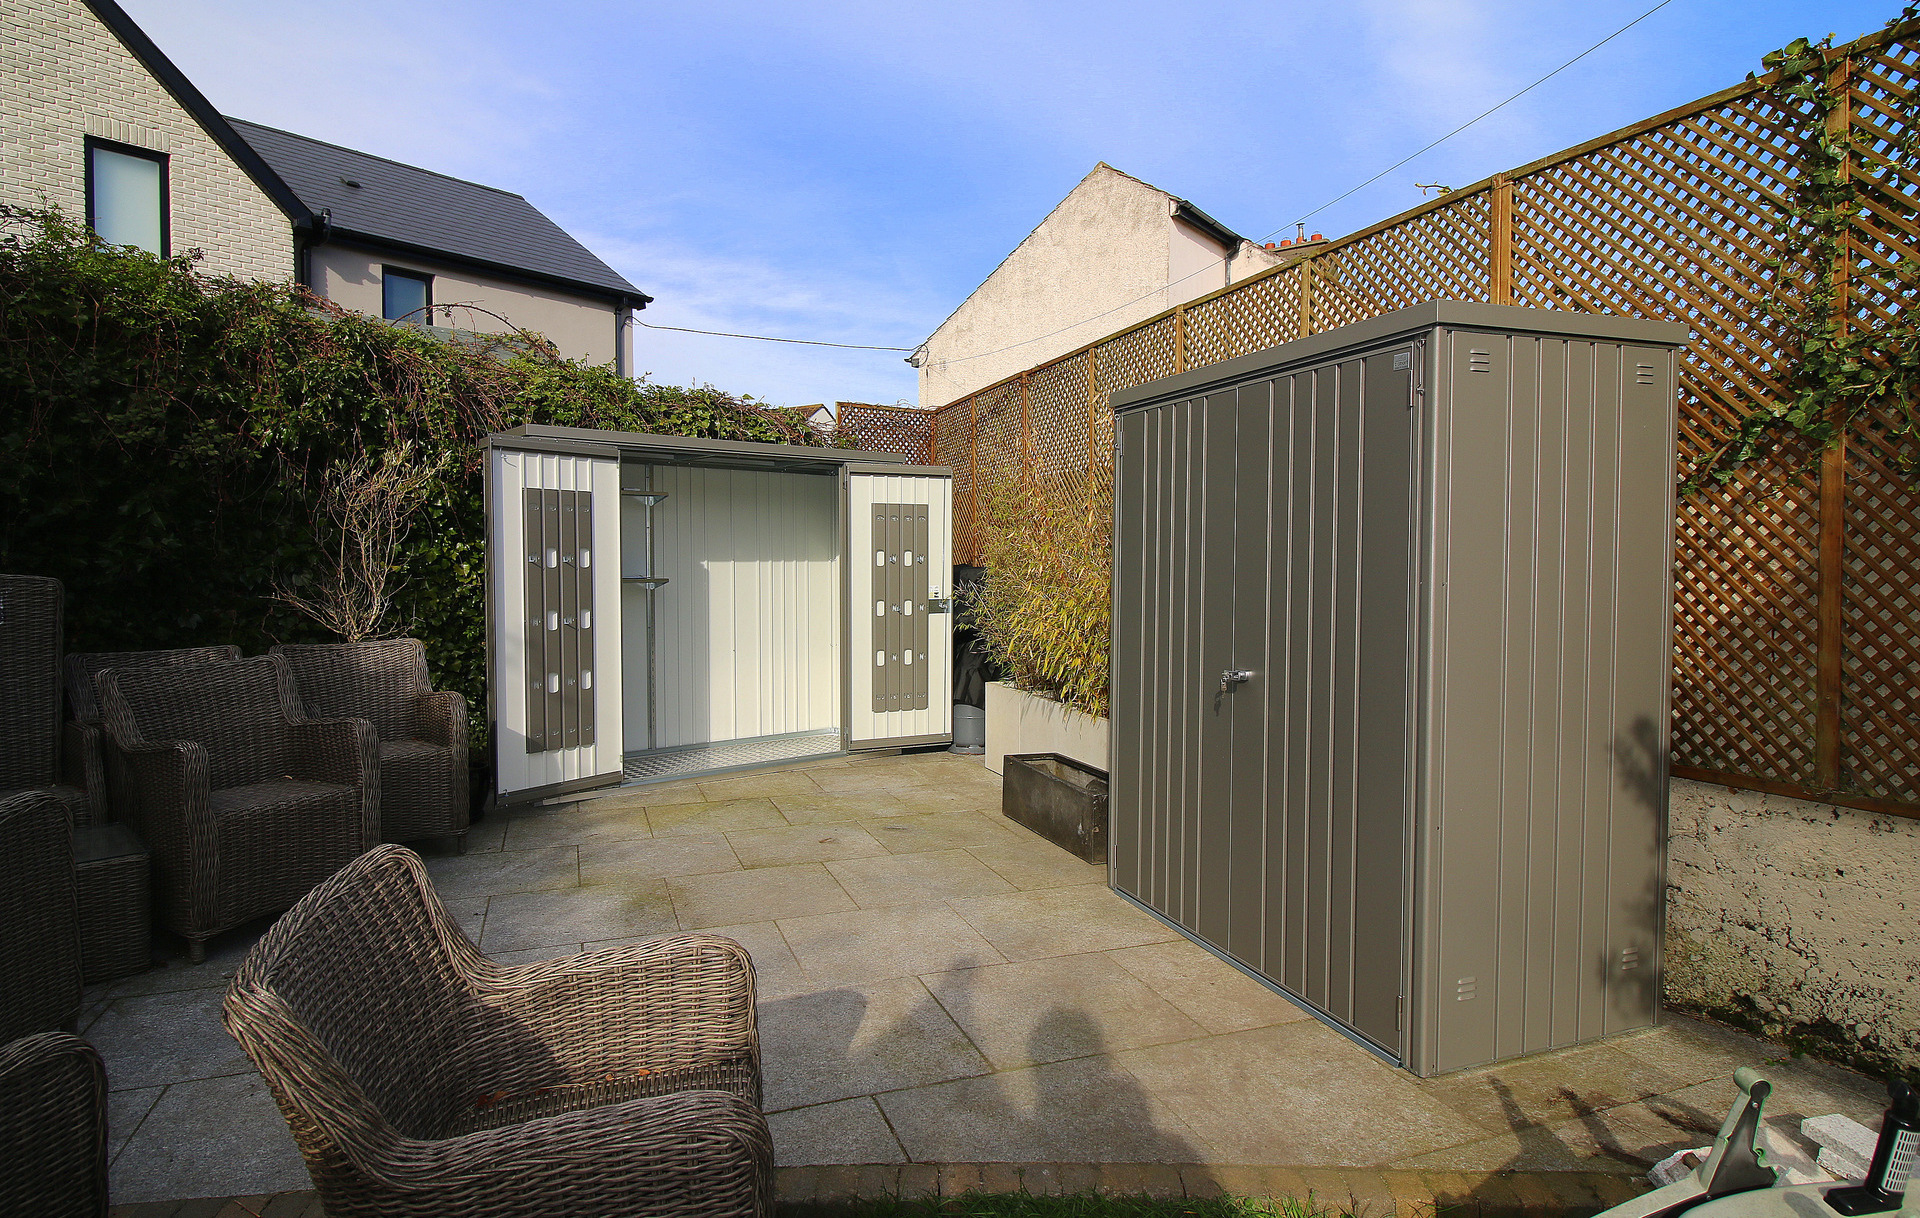 The superb quality and style of the Biohort Equipment Locker 230 in metallic quartz grey  with optional accessories including aluminium floor frame, aluminium floor panels | supplied + installed in Clontarf by Owen Chubb Landscapers. Tel 087-2306 128.